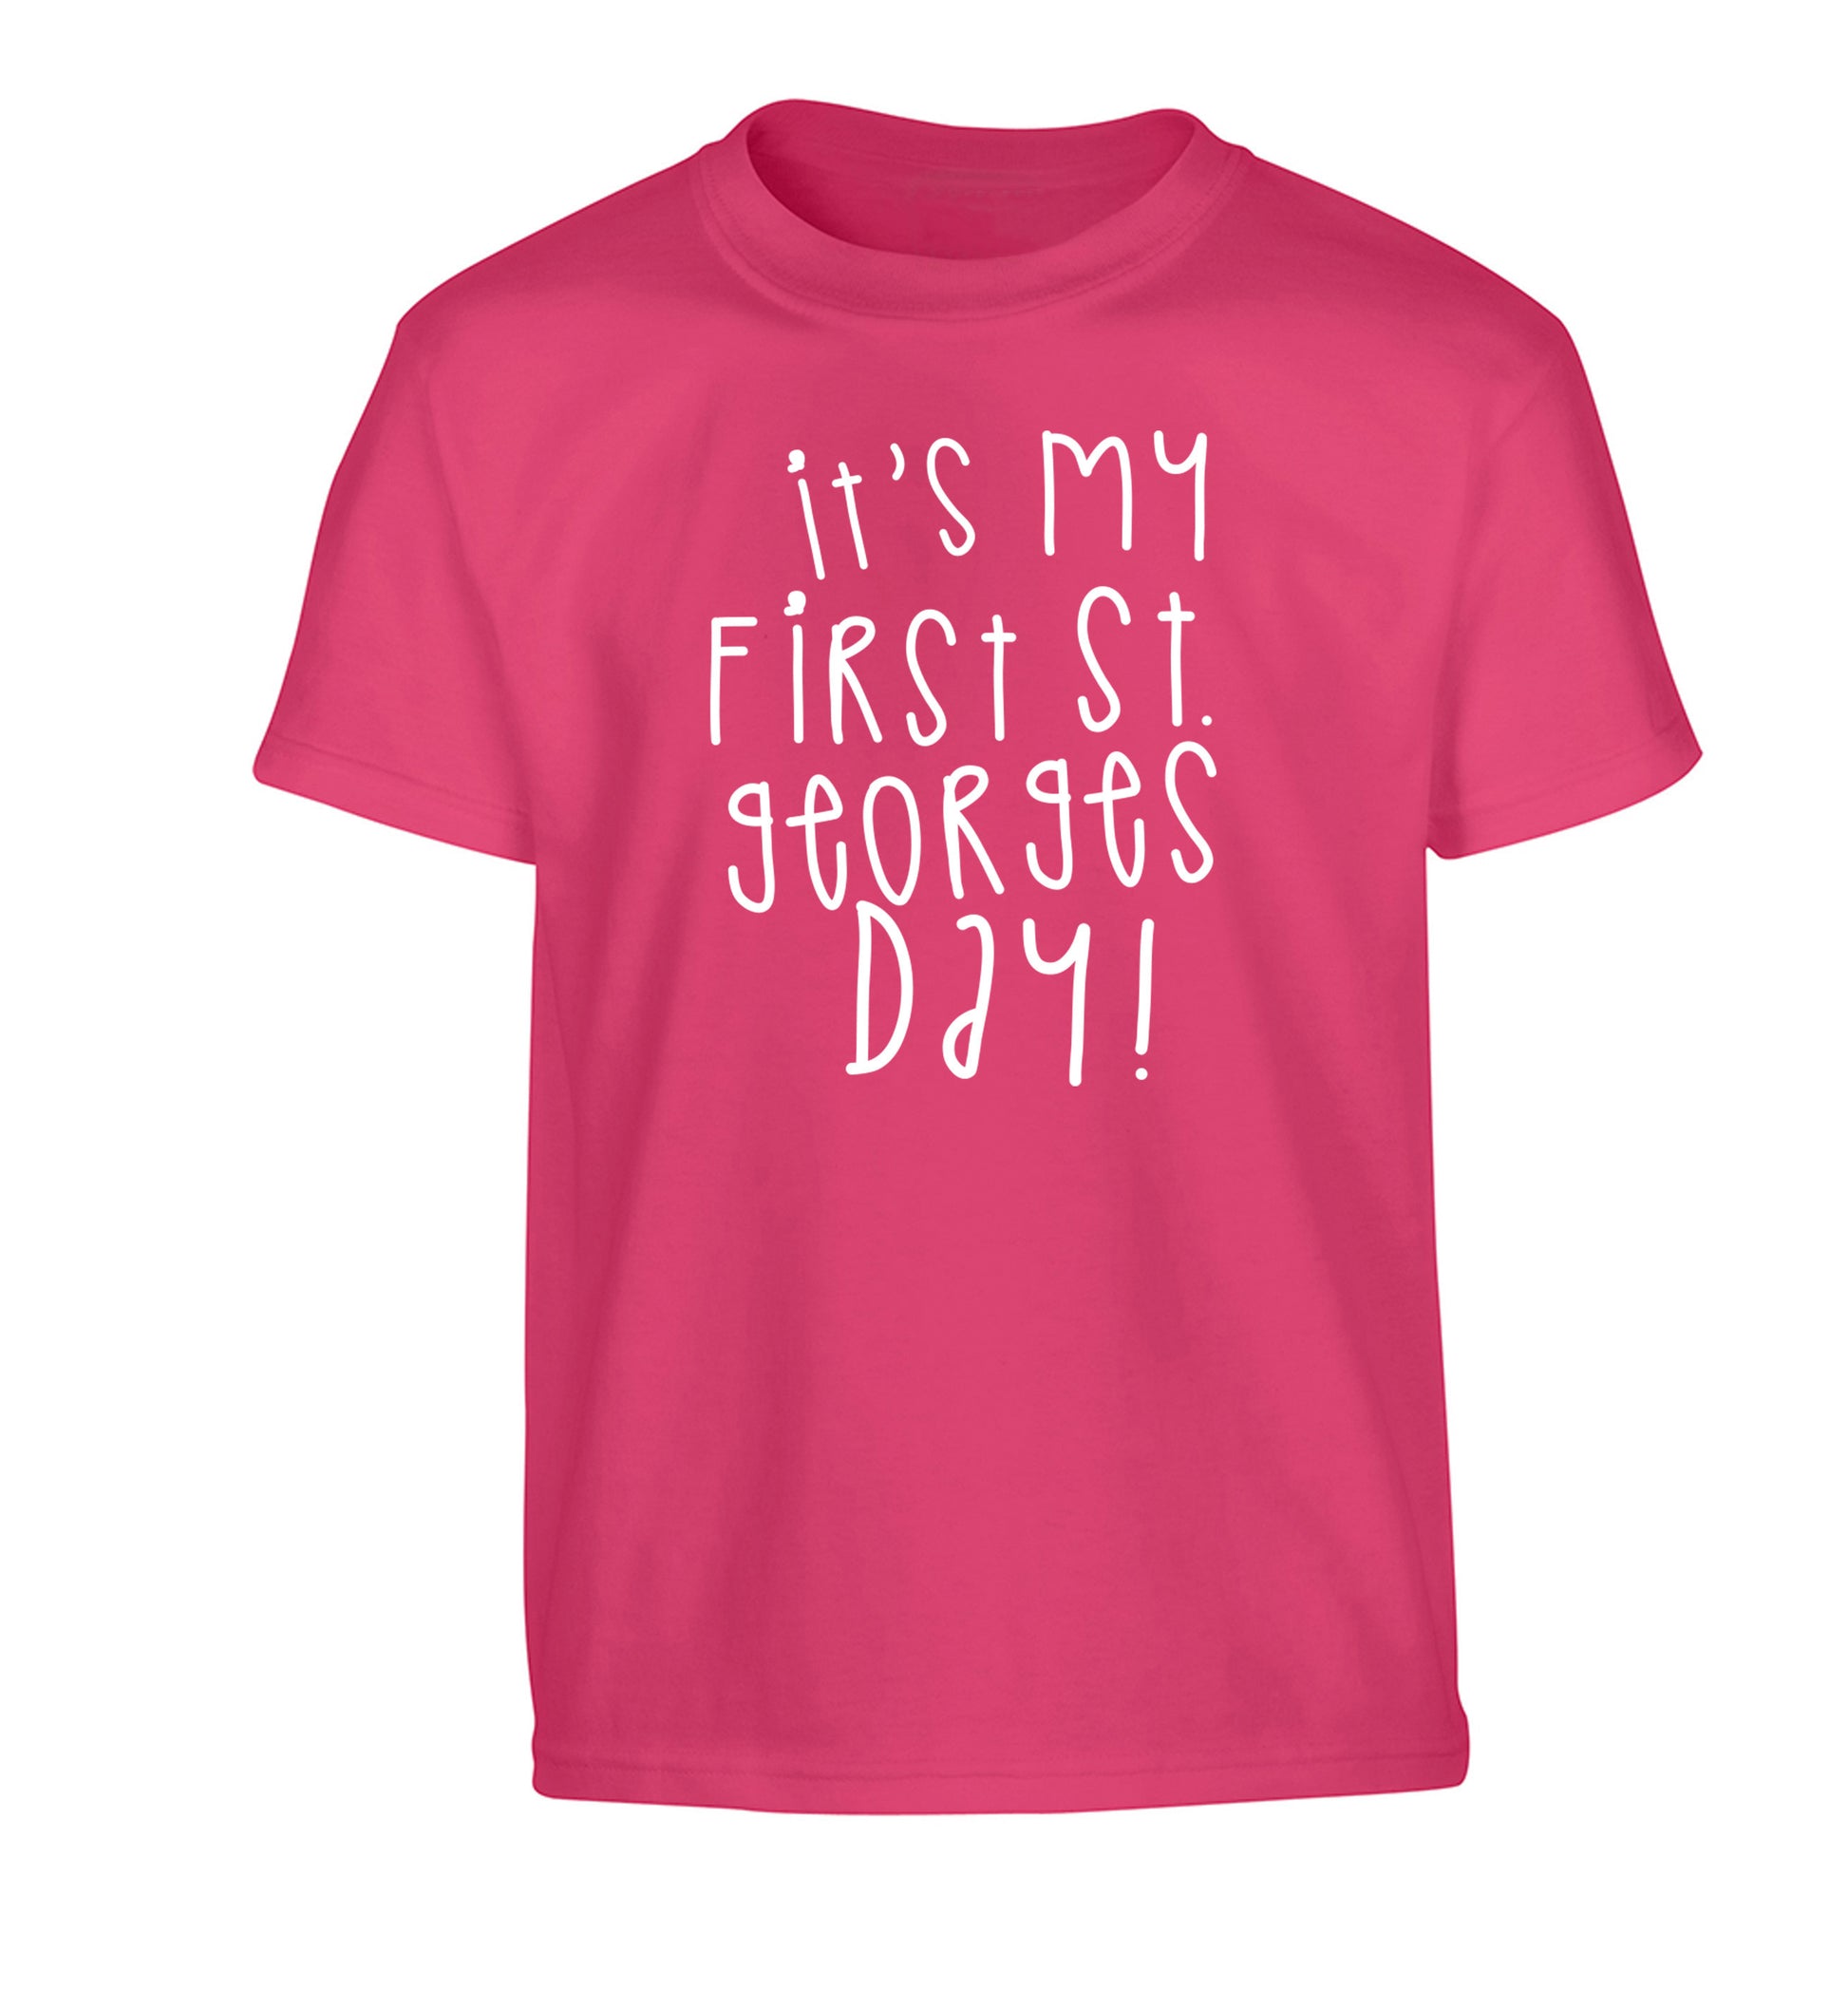 It's my first St Georges day Children's pink Tshirt 12-14 Years